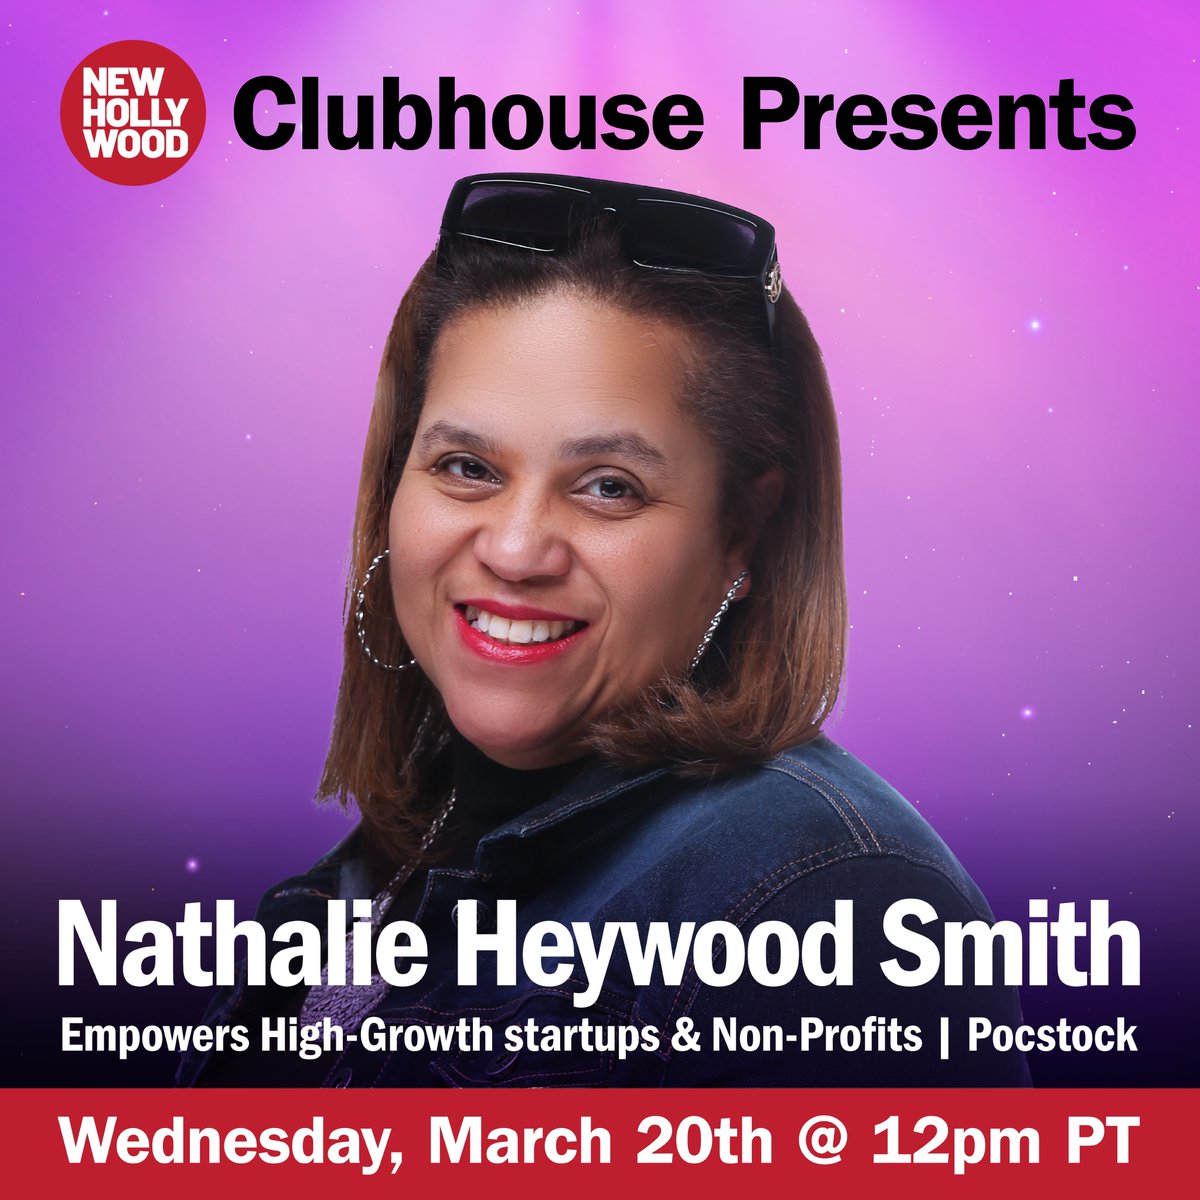 hey - join us Wednesday, 12:00 pm PT for 'NATHALIE HEYWOOD SMITH: Pocstock & HighGrowth Startups & Nonprofit.' ⁦It's going to be an excellent interview. LIVE SHOW at: clubhouse.com/invite/p7bHVe8… @newhollywoodmov @theevettevargas @NewHollywoodNow ⁩